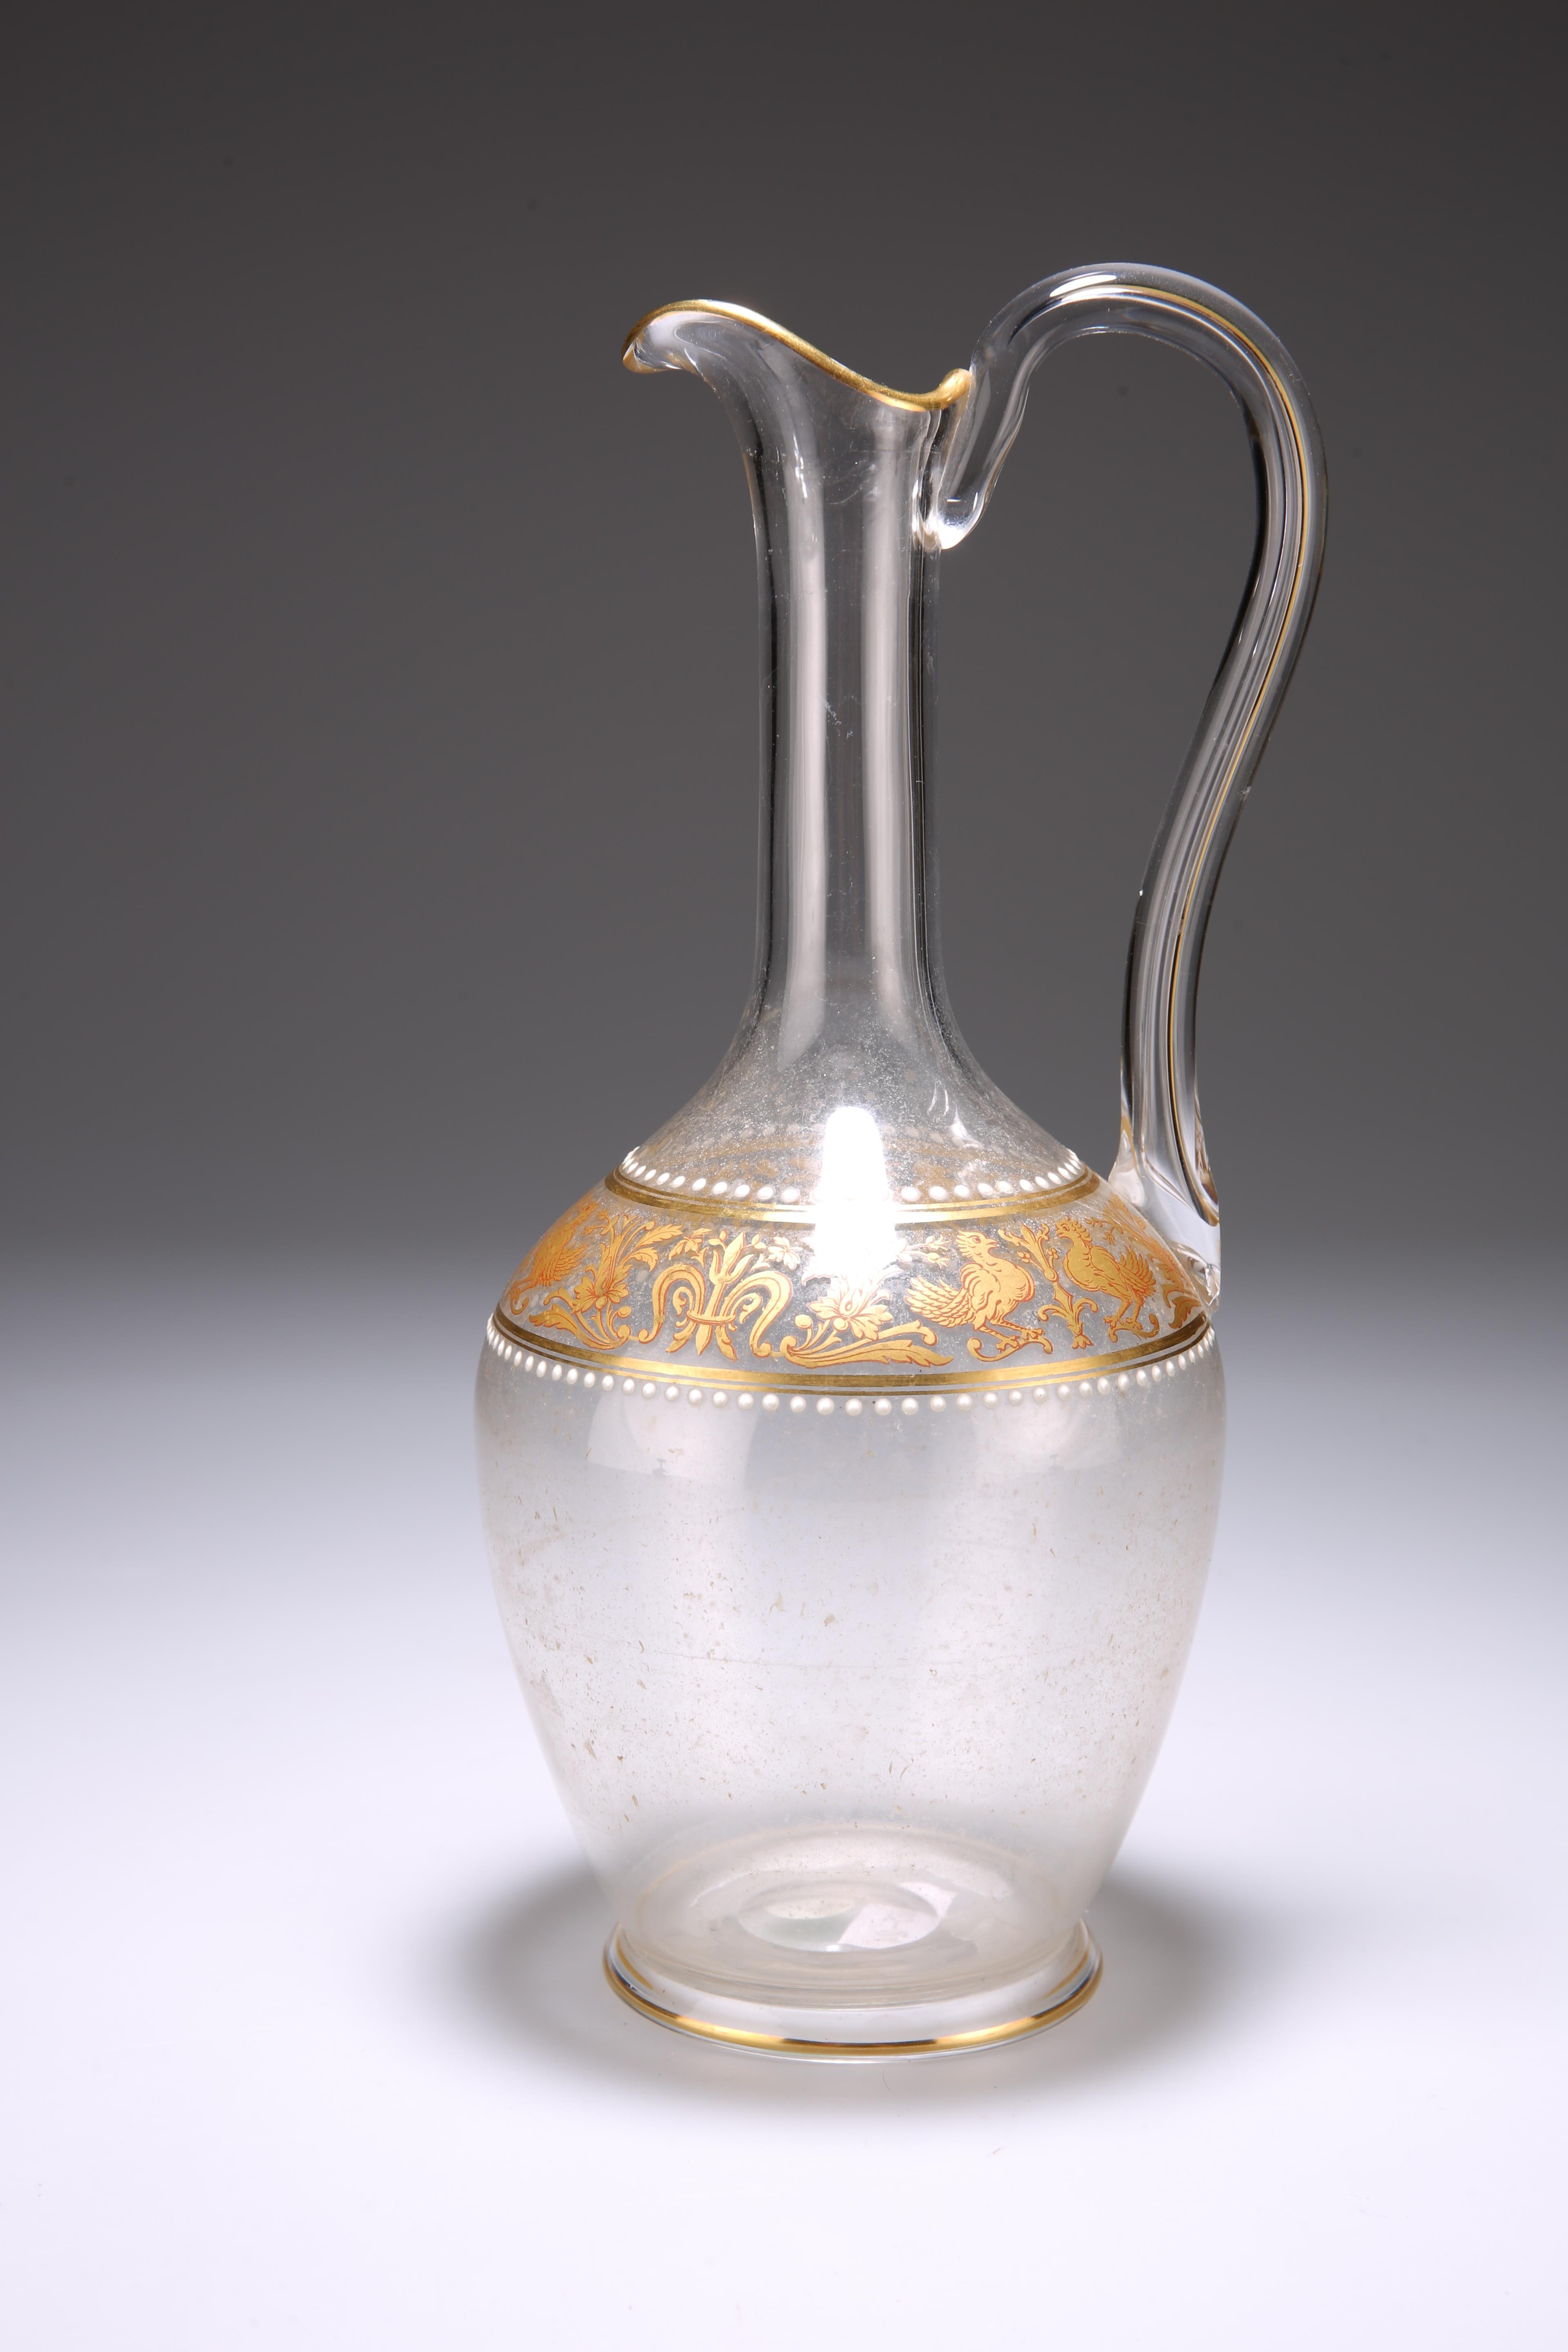 A FINE FRENCH GLASS EWER, 19TH CENTURY, POSSIBLY ST. LOUIS, of Classical shape, decorated with